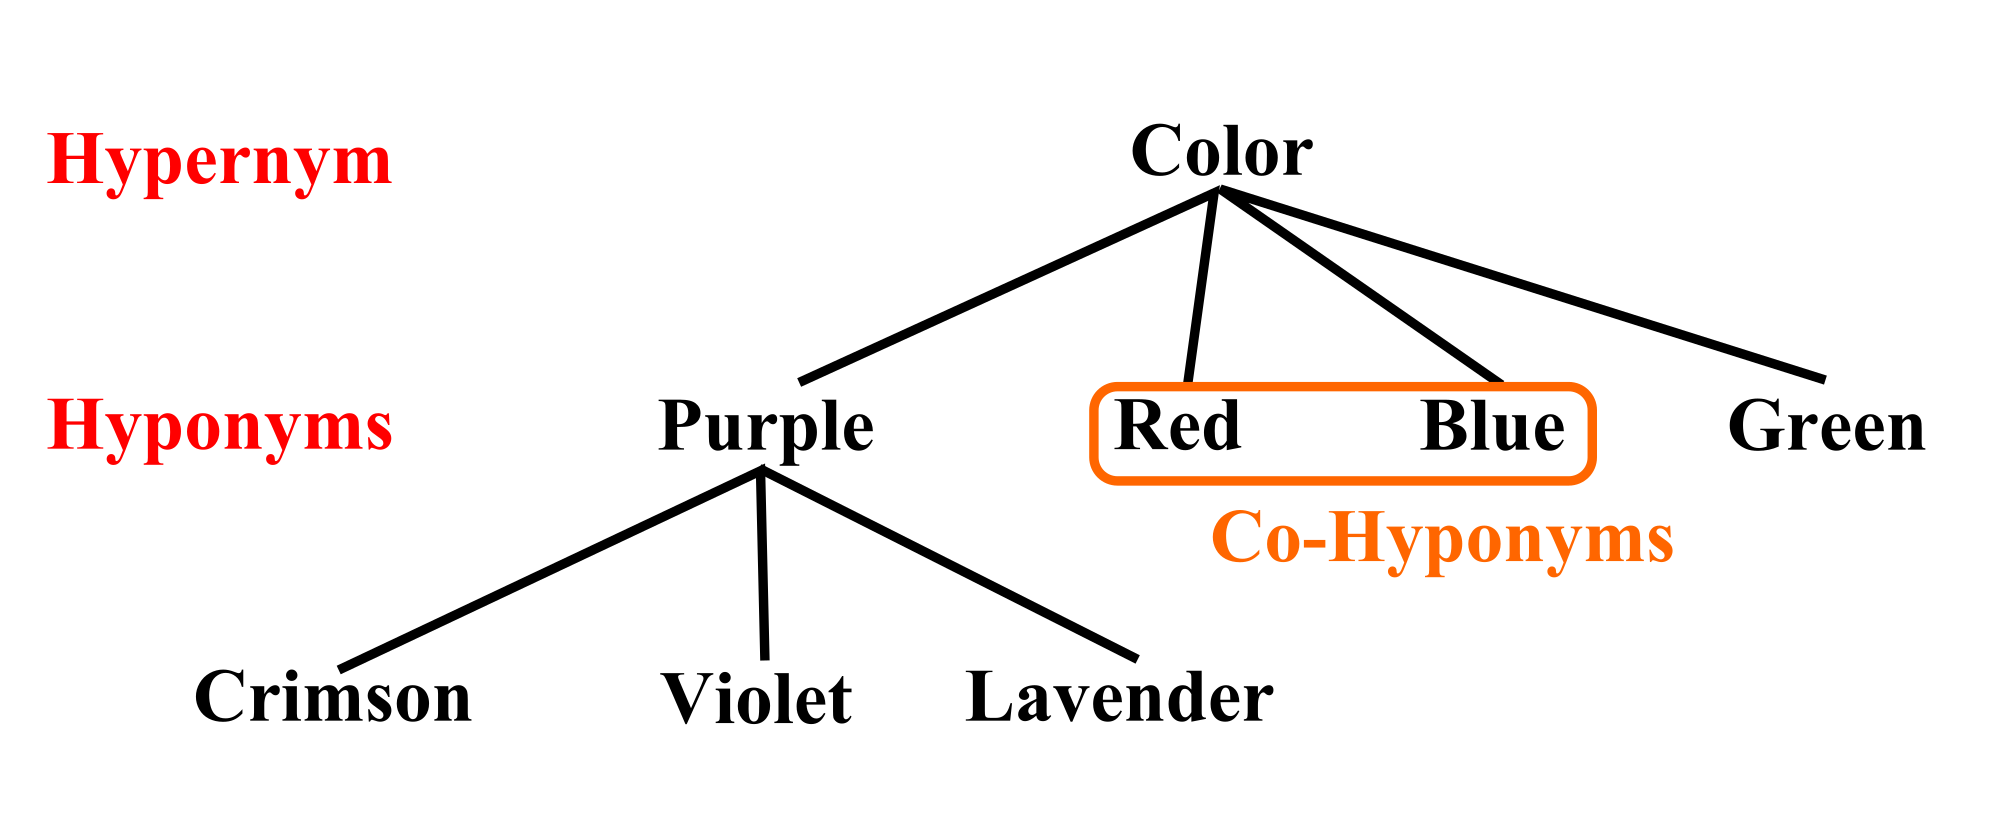 Linguistic tree illustrating relationships between terms describing colour. Source: Wikimedia Commons.